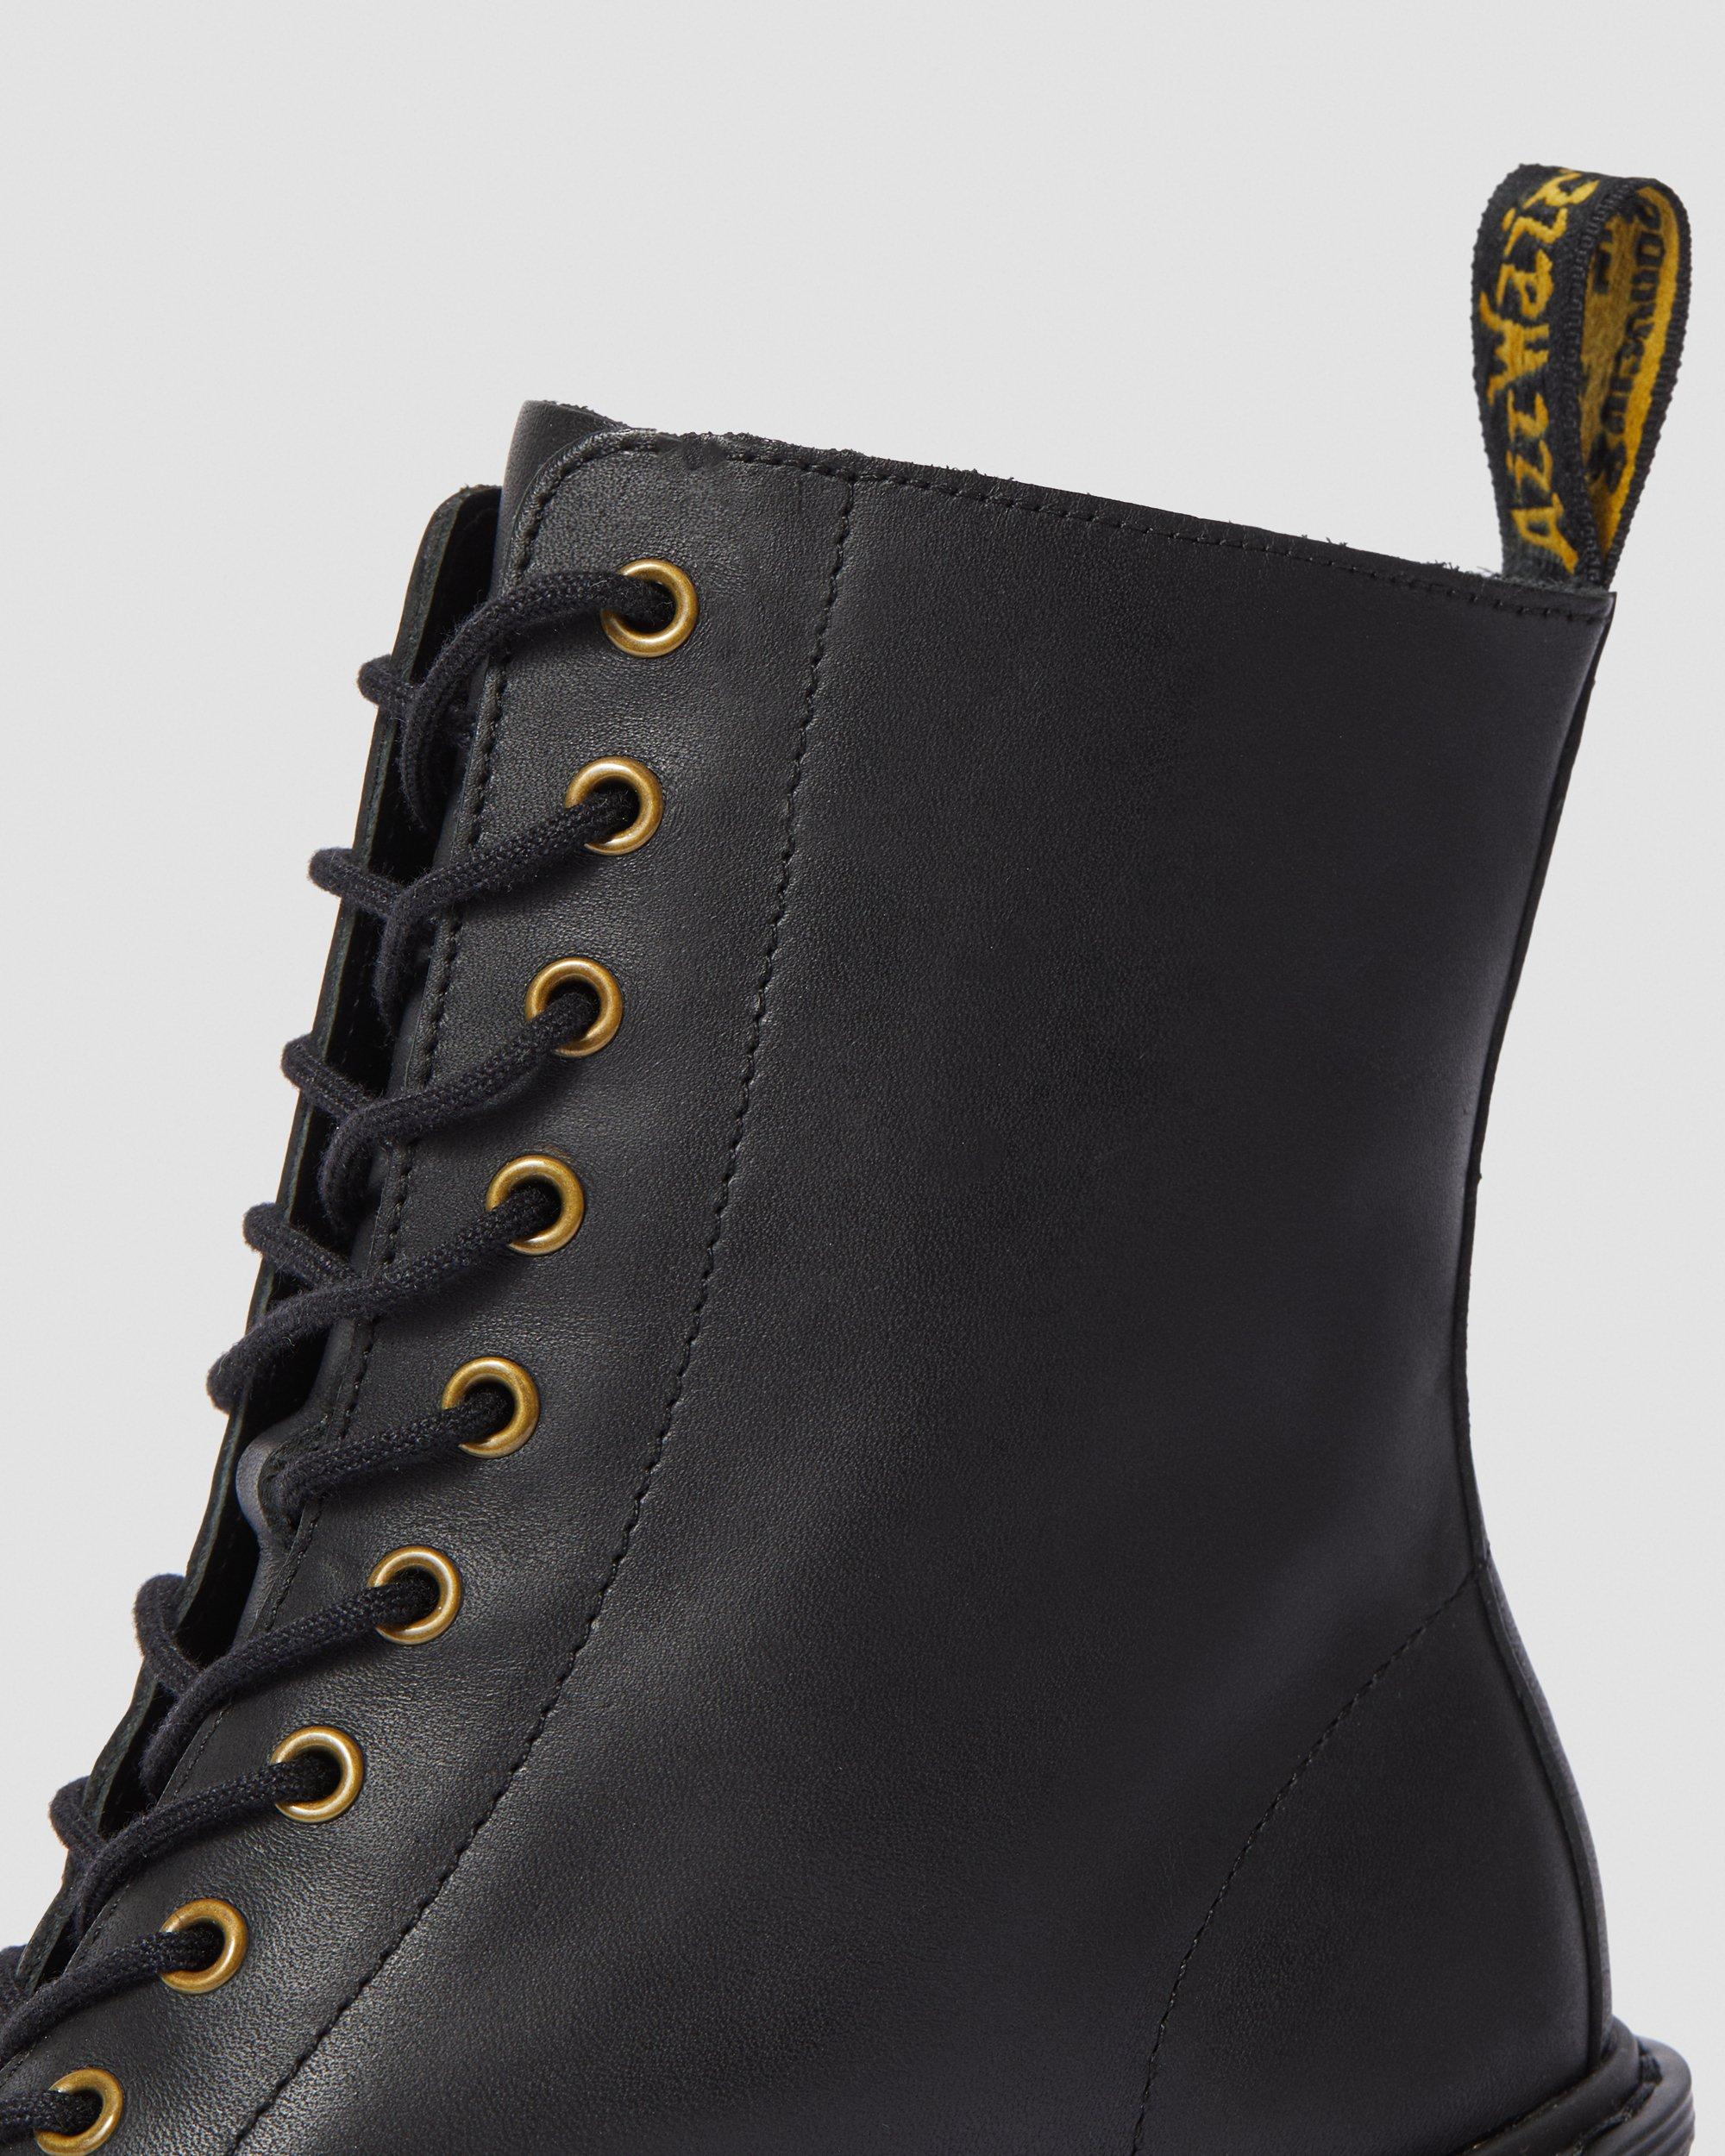 https://i1.adis.ws/i/drmartens/23927001.88.jpg?$large$Kendra Women's Leather Heeled Boots Dr. Martens